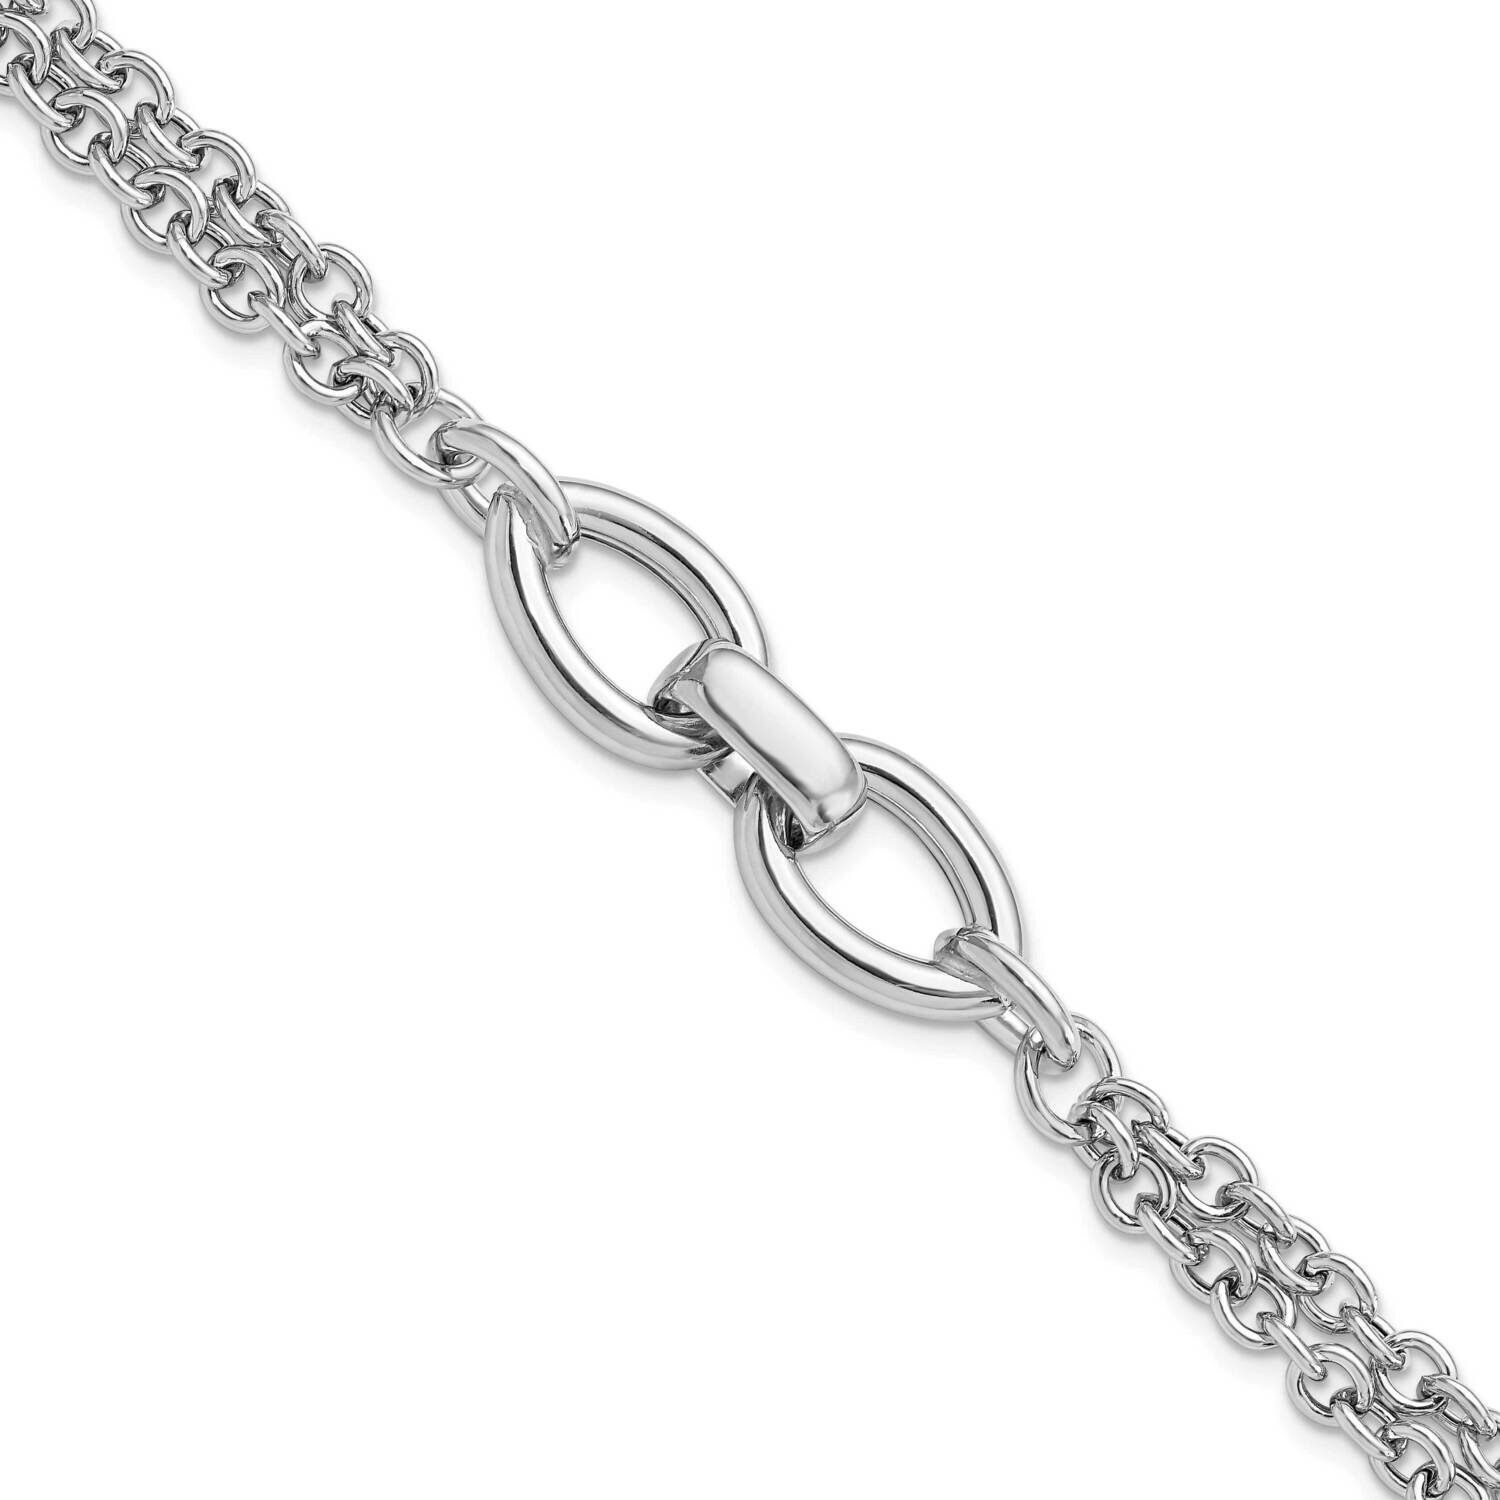 Double Chain with 2 Oval Links Bracelet Sterling Silver Rhodium-Plated QG5846-7.75